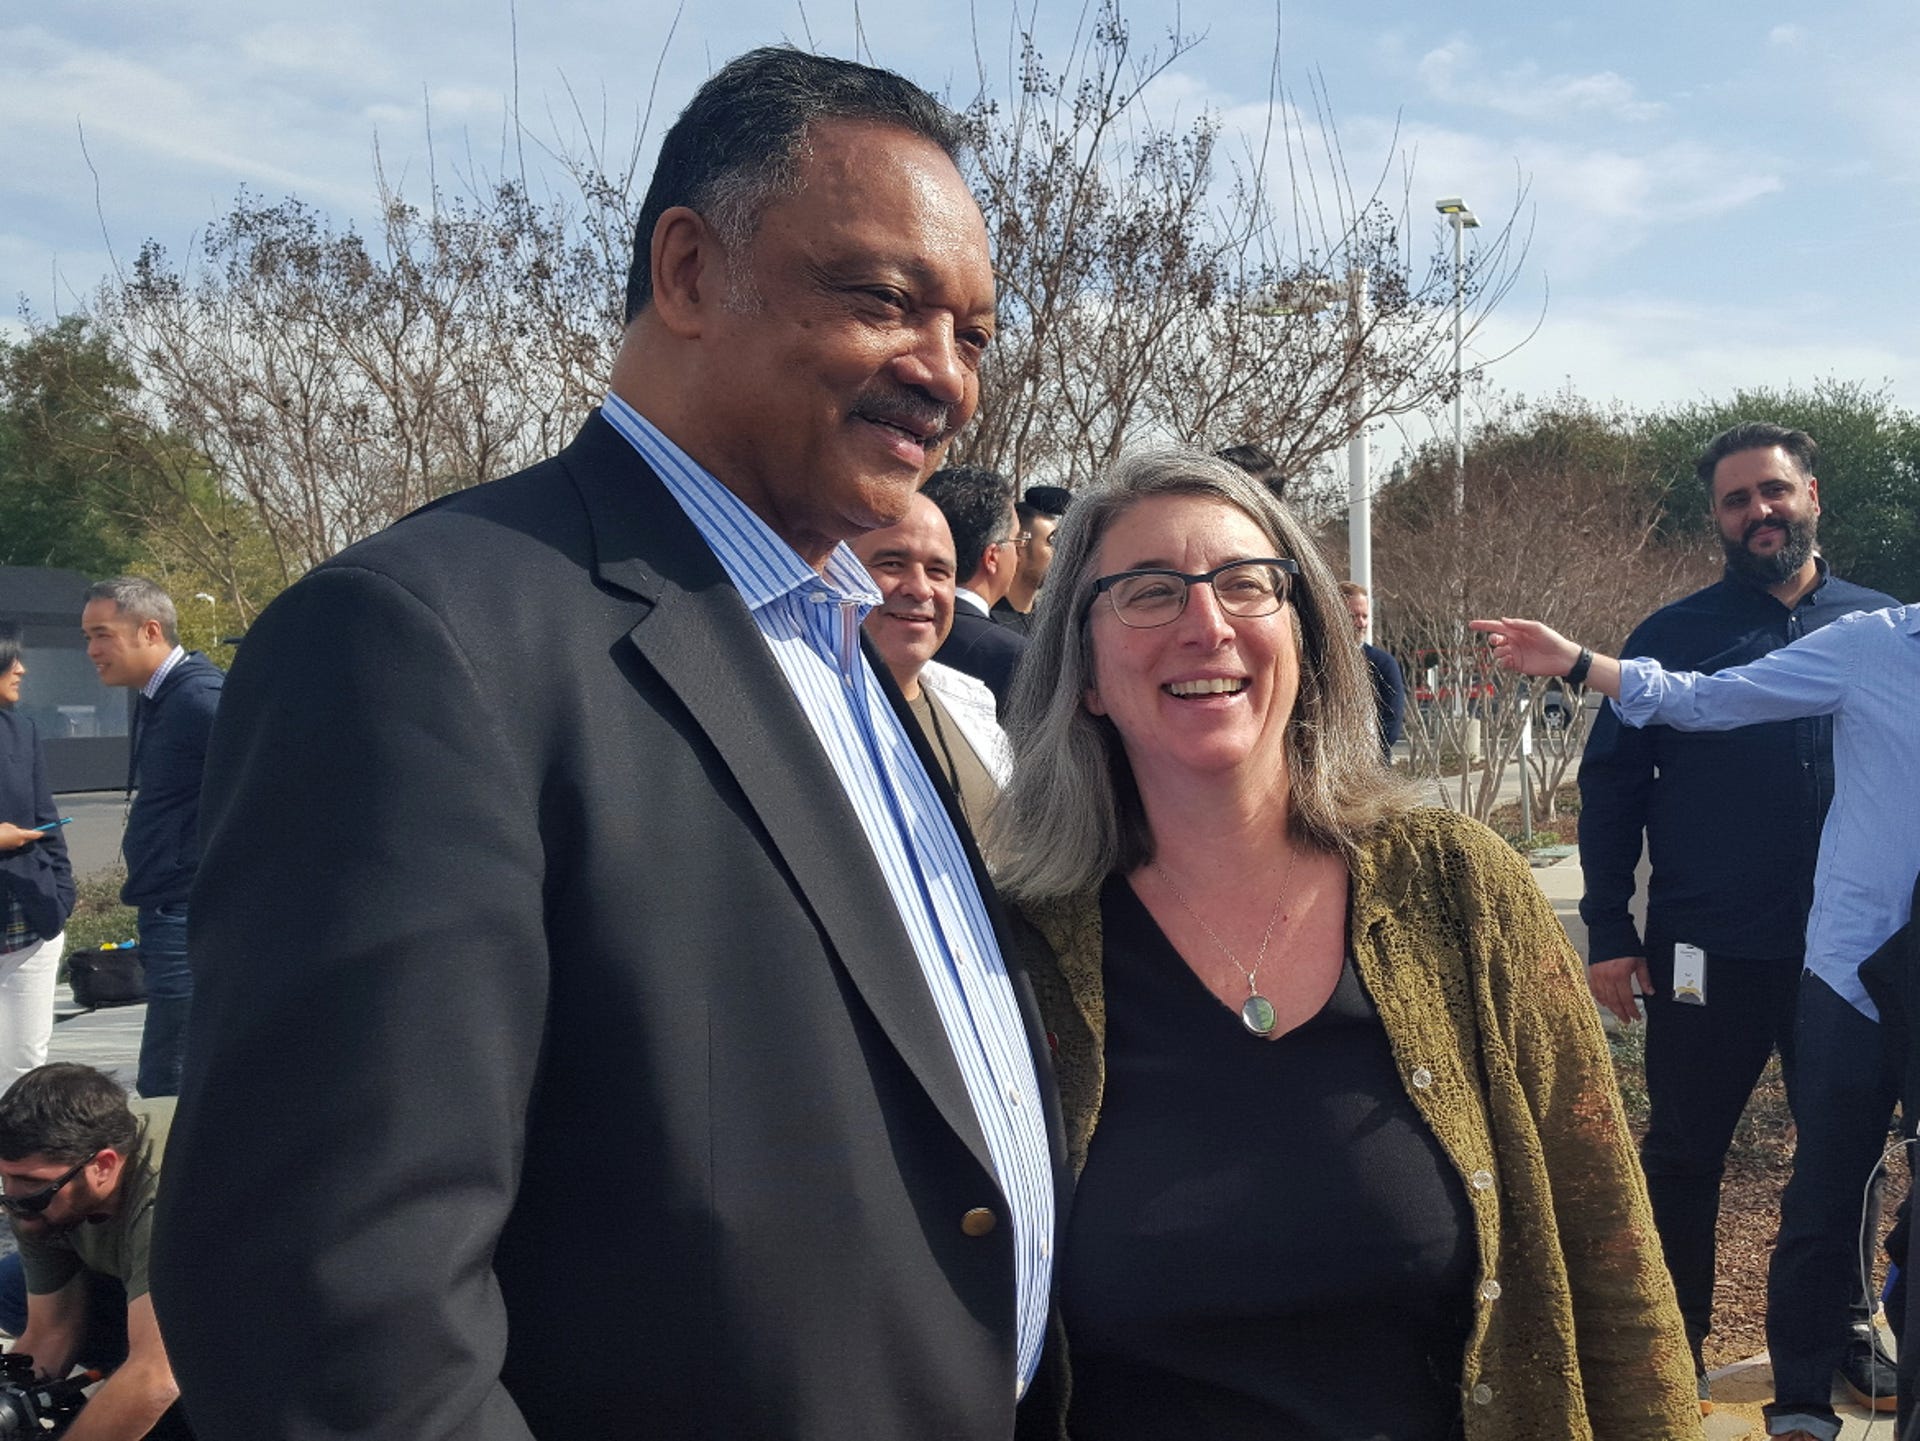 The Rev. Jesse Jackson and Cindy Cohn, executive director of digital-rights group the Electronic Frontier Foundation, voice their support for Apple's privacy stance.